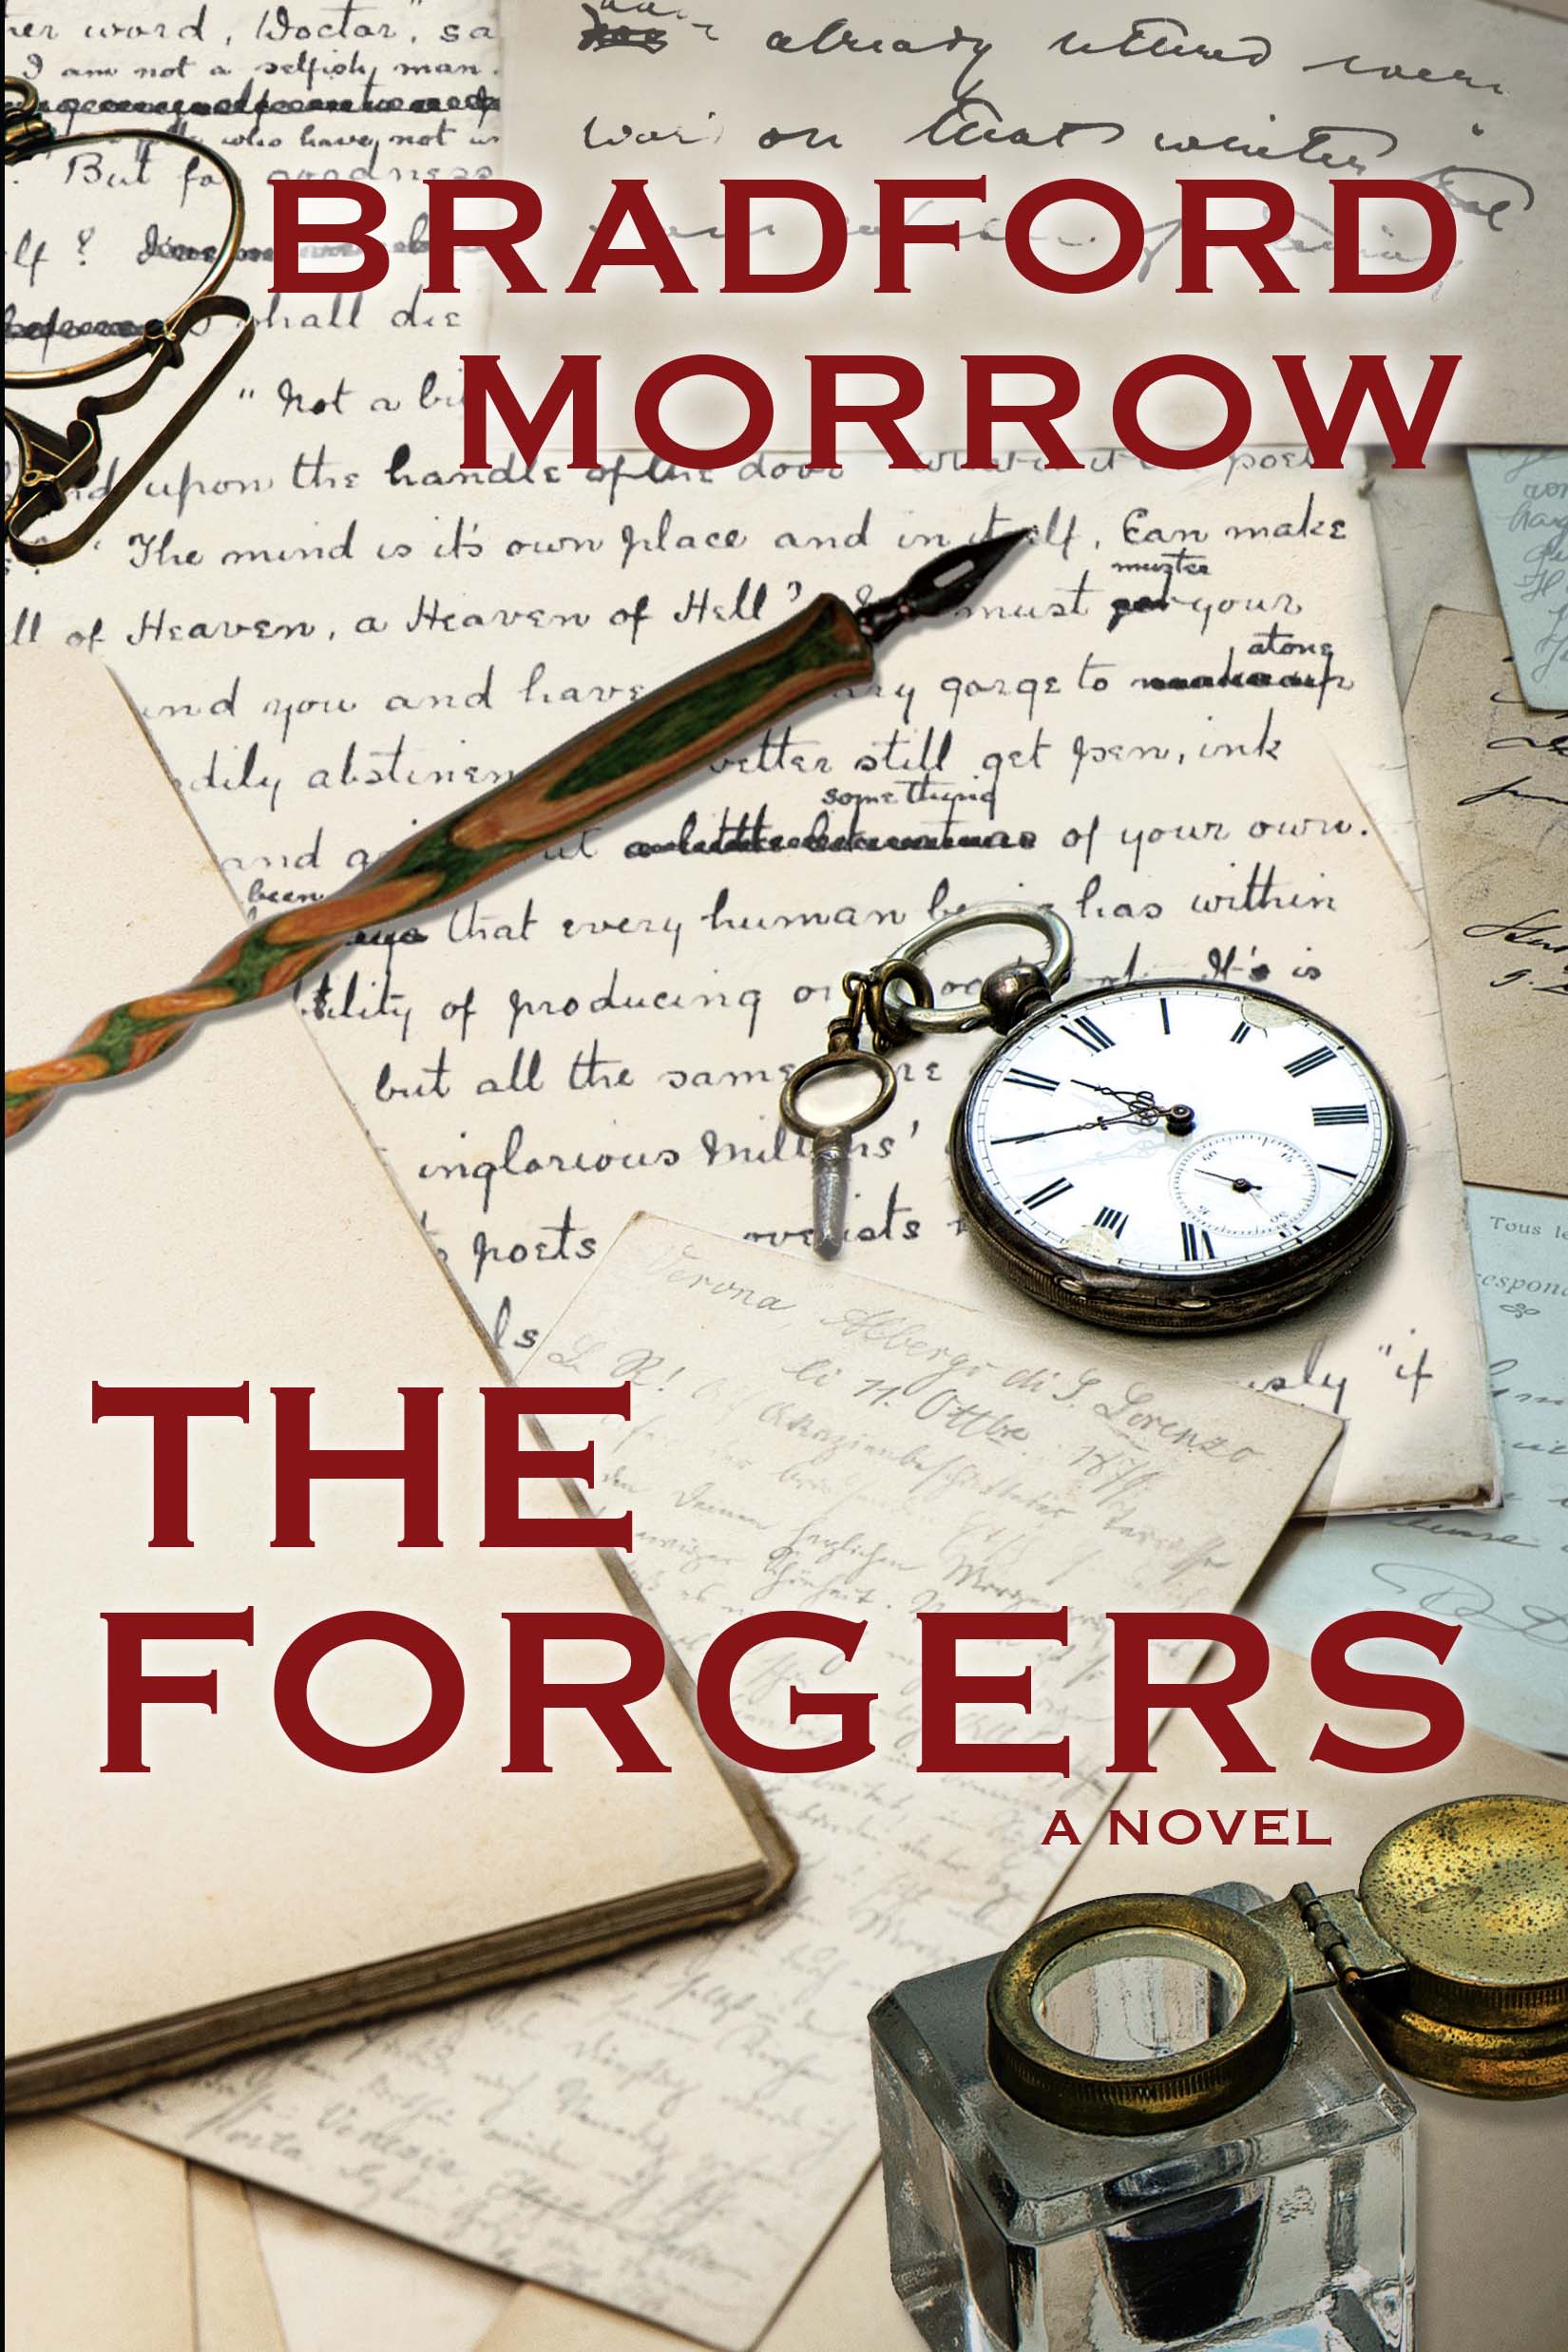 ACCENT: THE FORGERS by Bradford Morrow